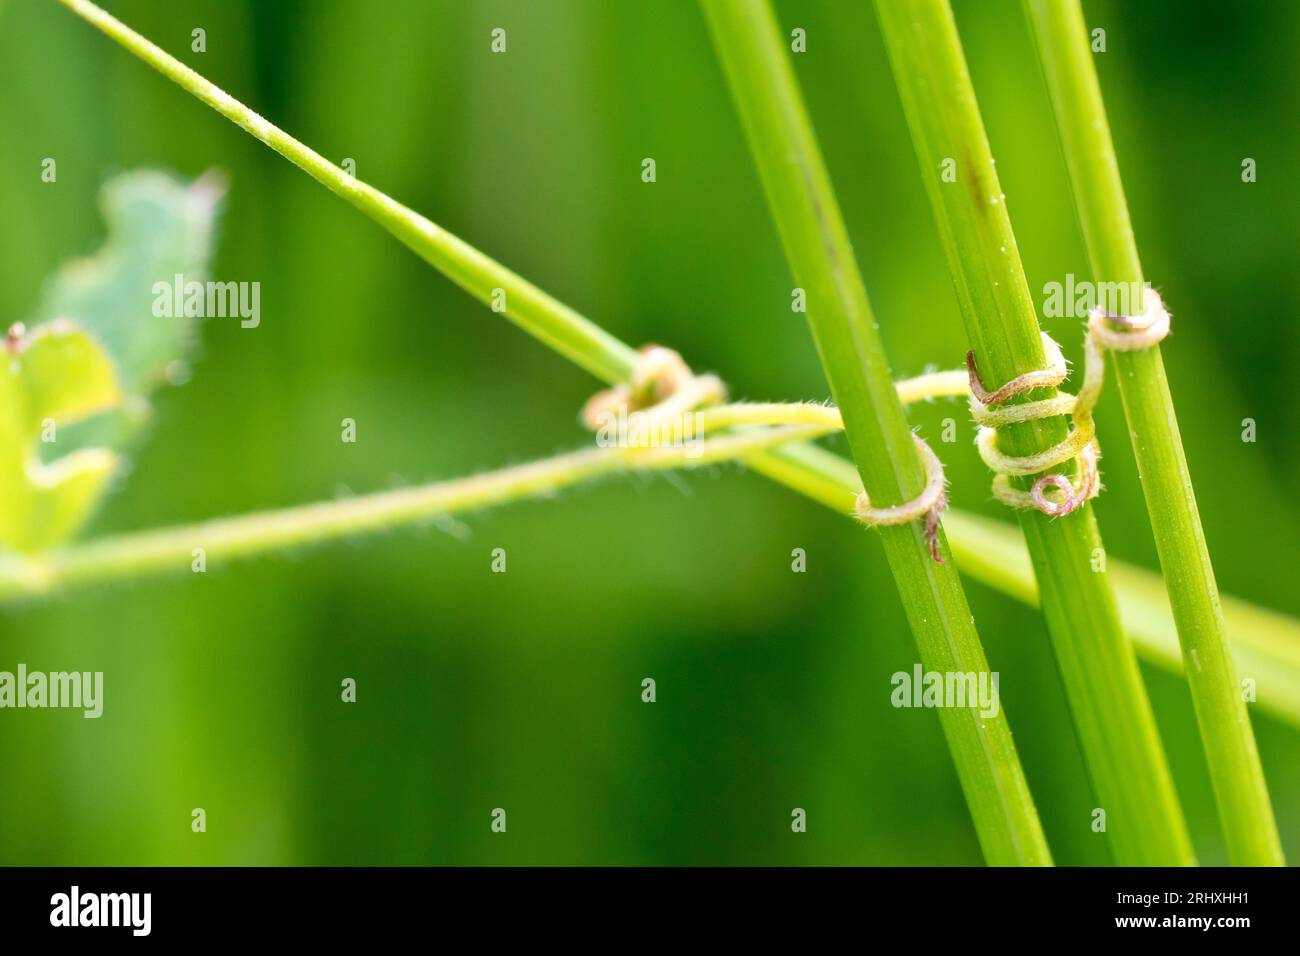 Close up of the tendrils at the end of a branch of Common Vetch (vicia sativa) clasping three grass stems in order to support the plant as it grows. Stock Photo